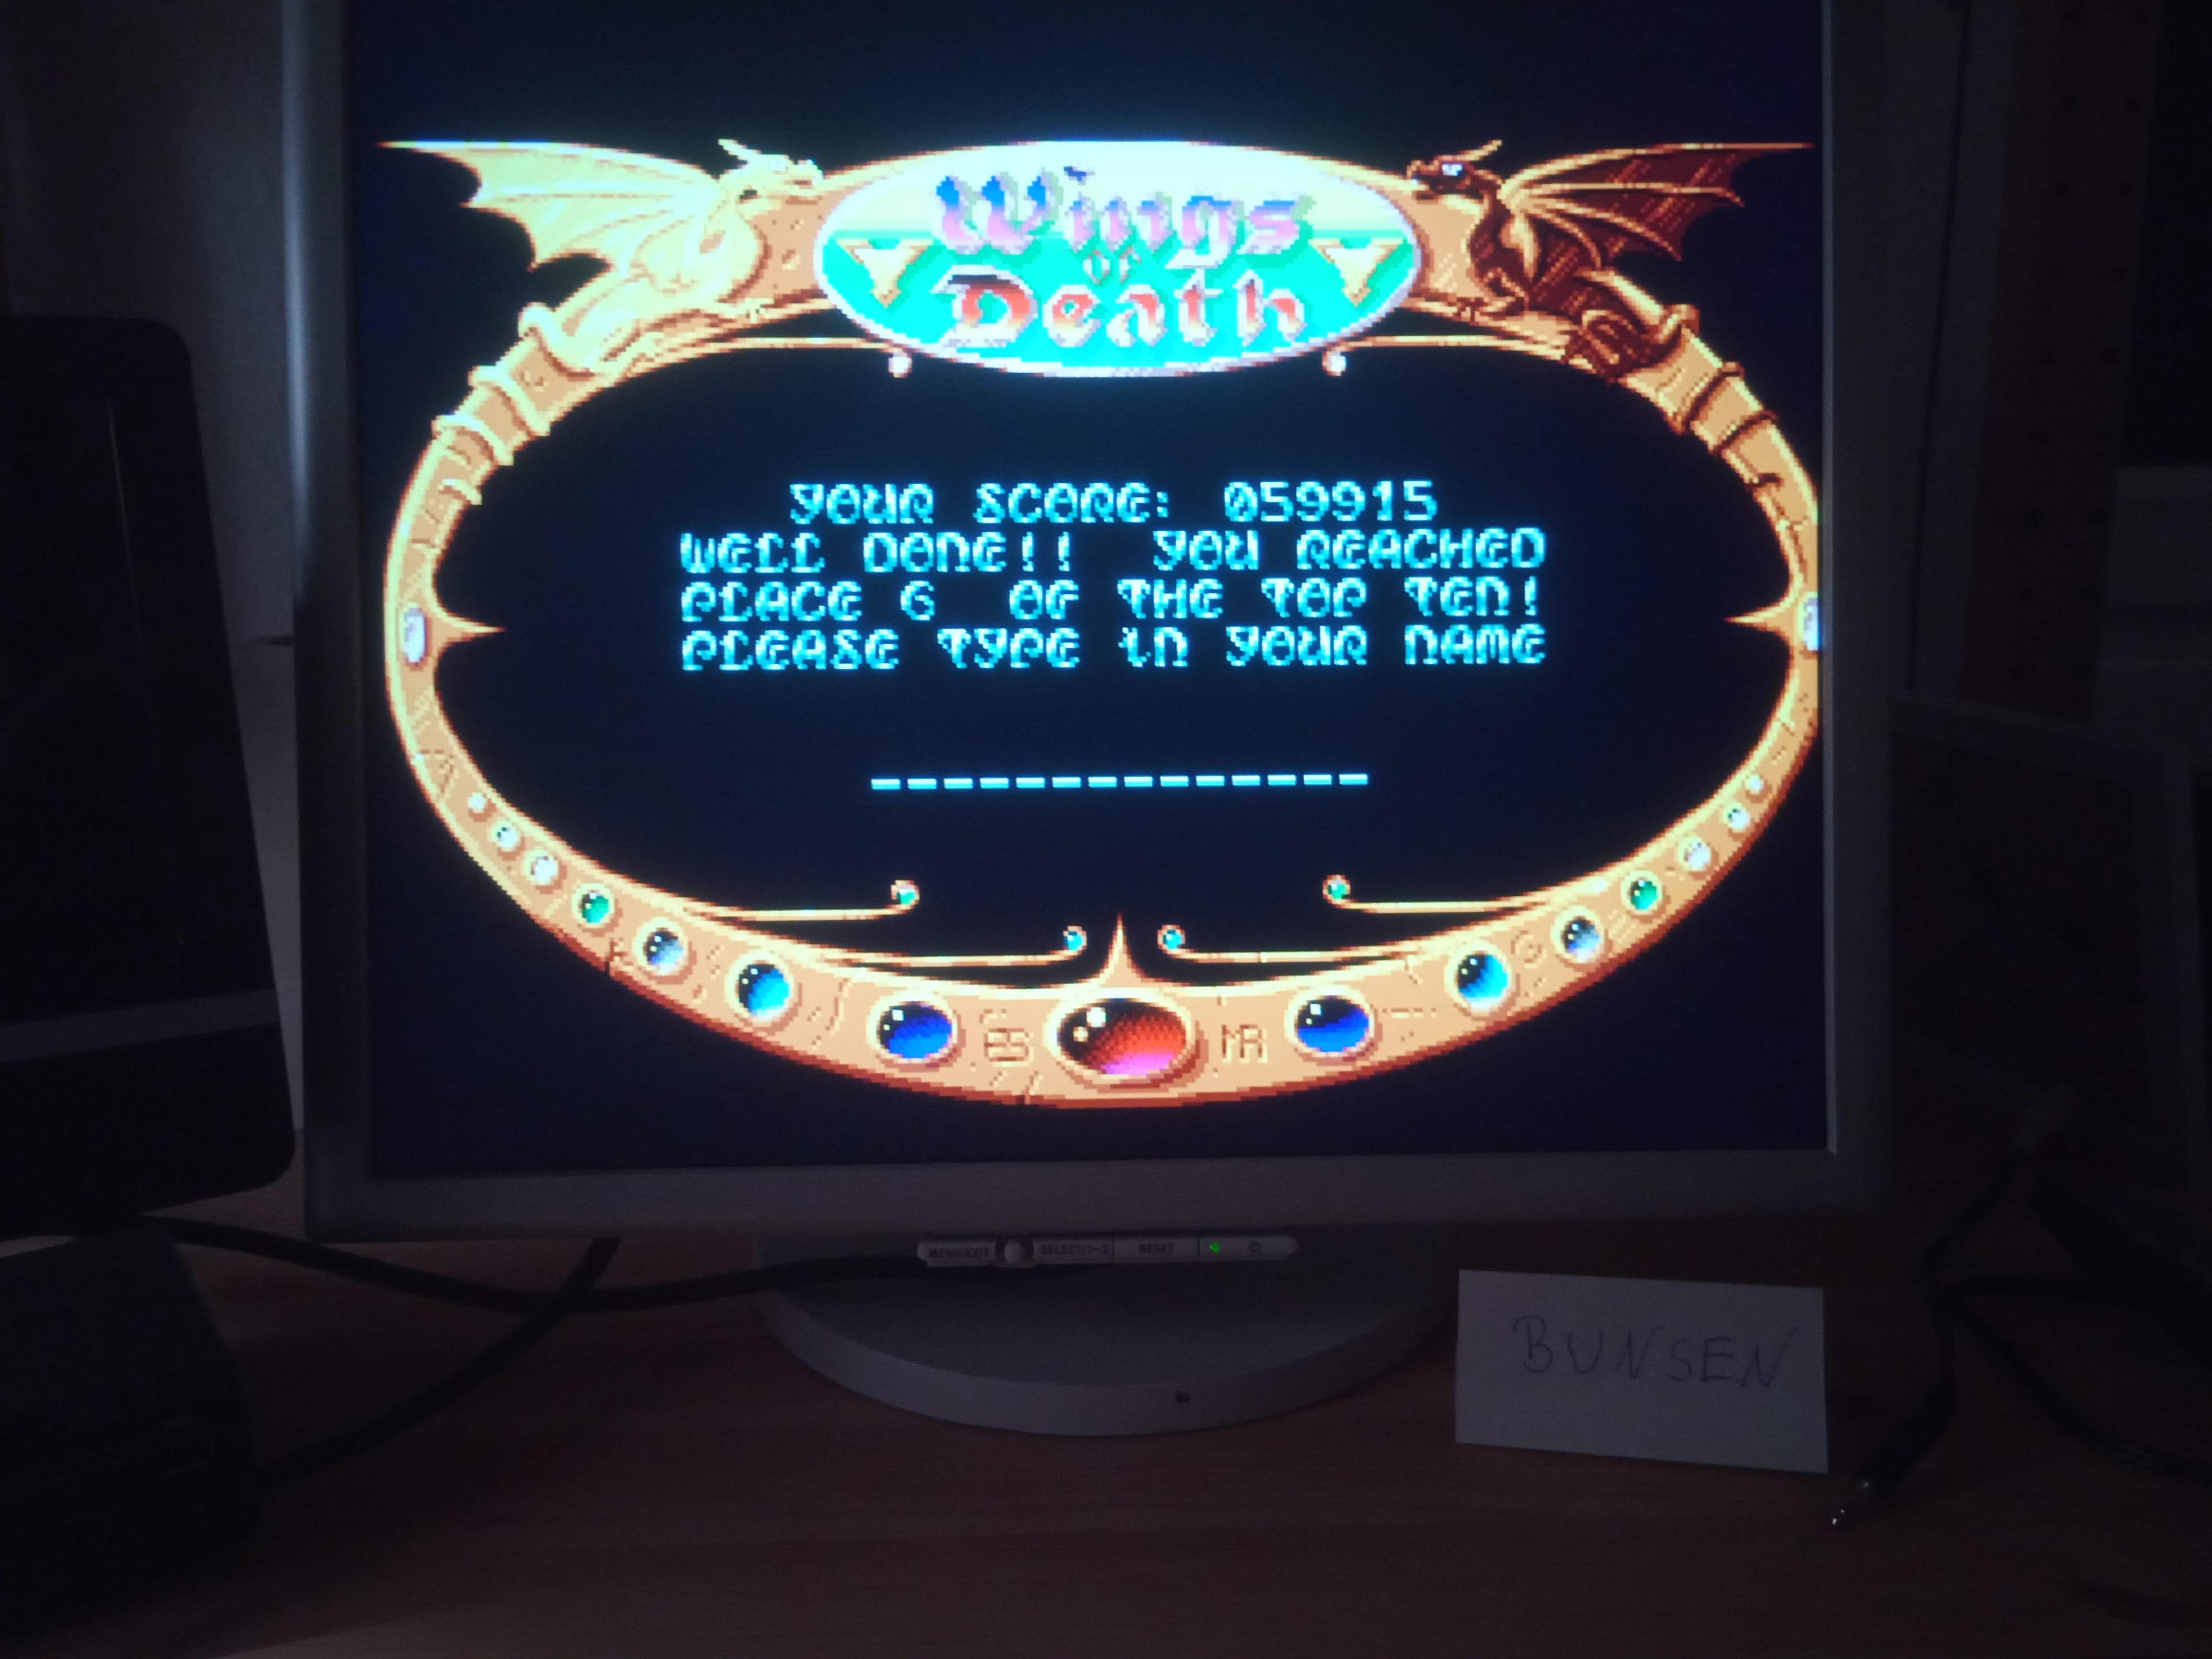 Wings of Death 59,915 points